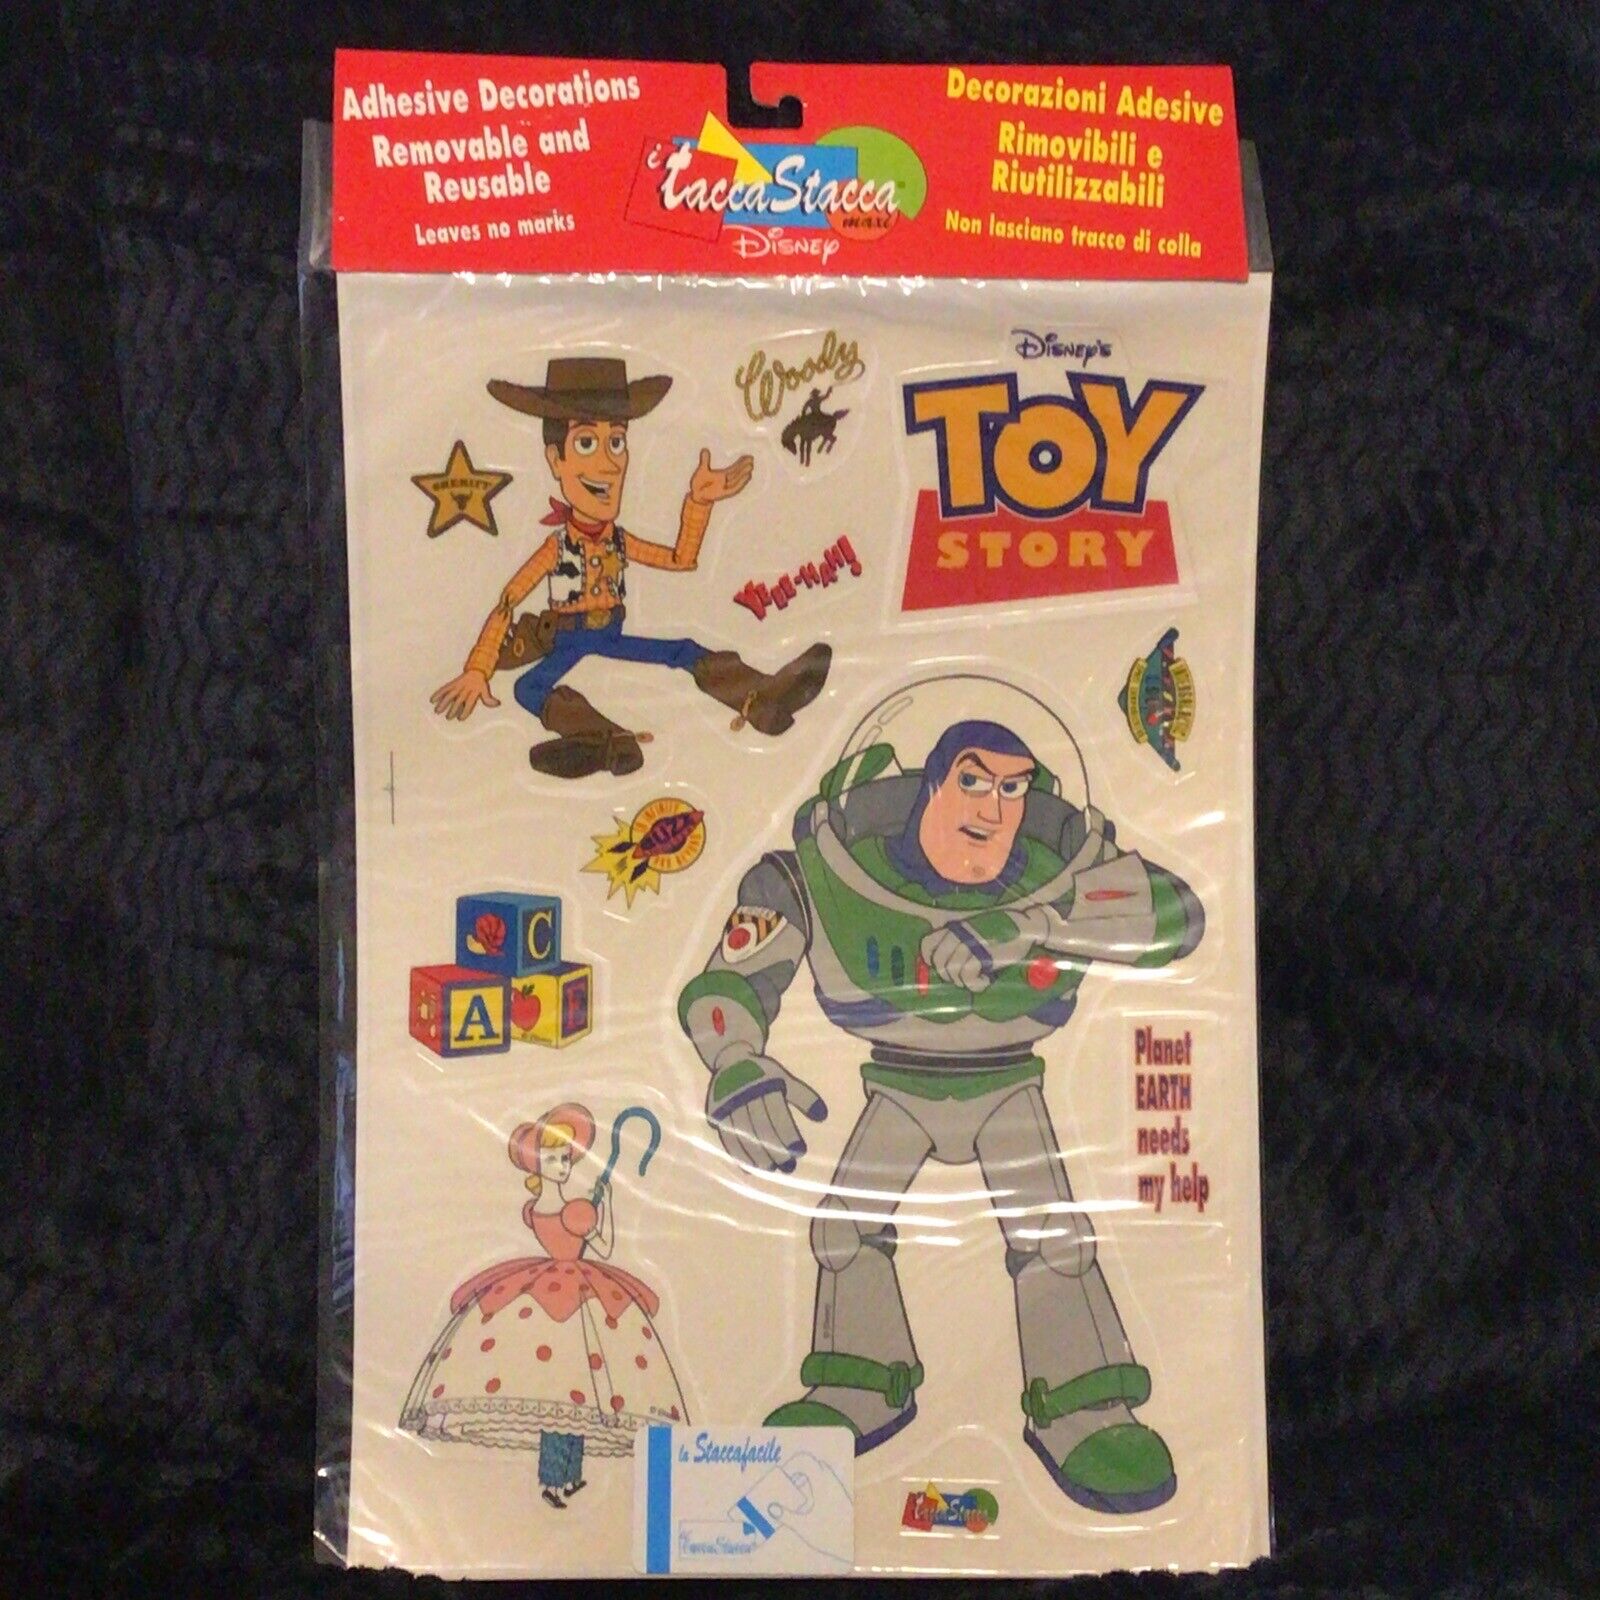 Vint 90s Tacca Stacca Disney Original Toy Story Reusable Adhesive Decoration NOS